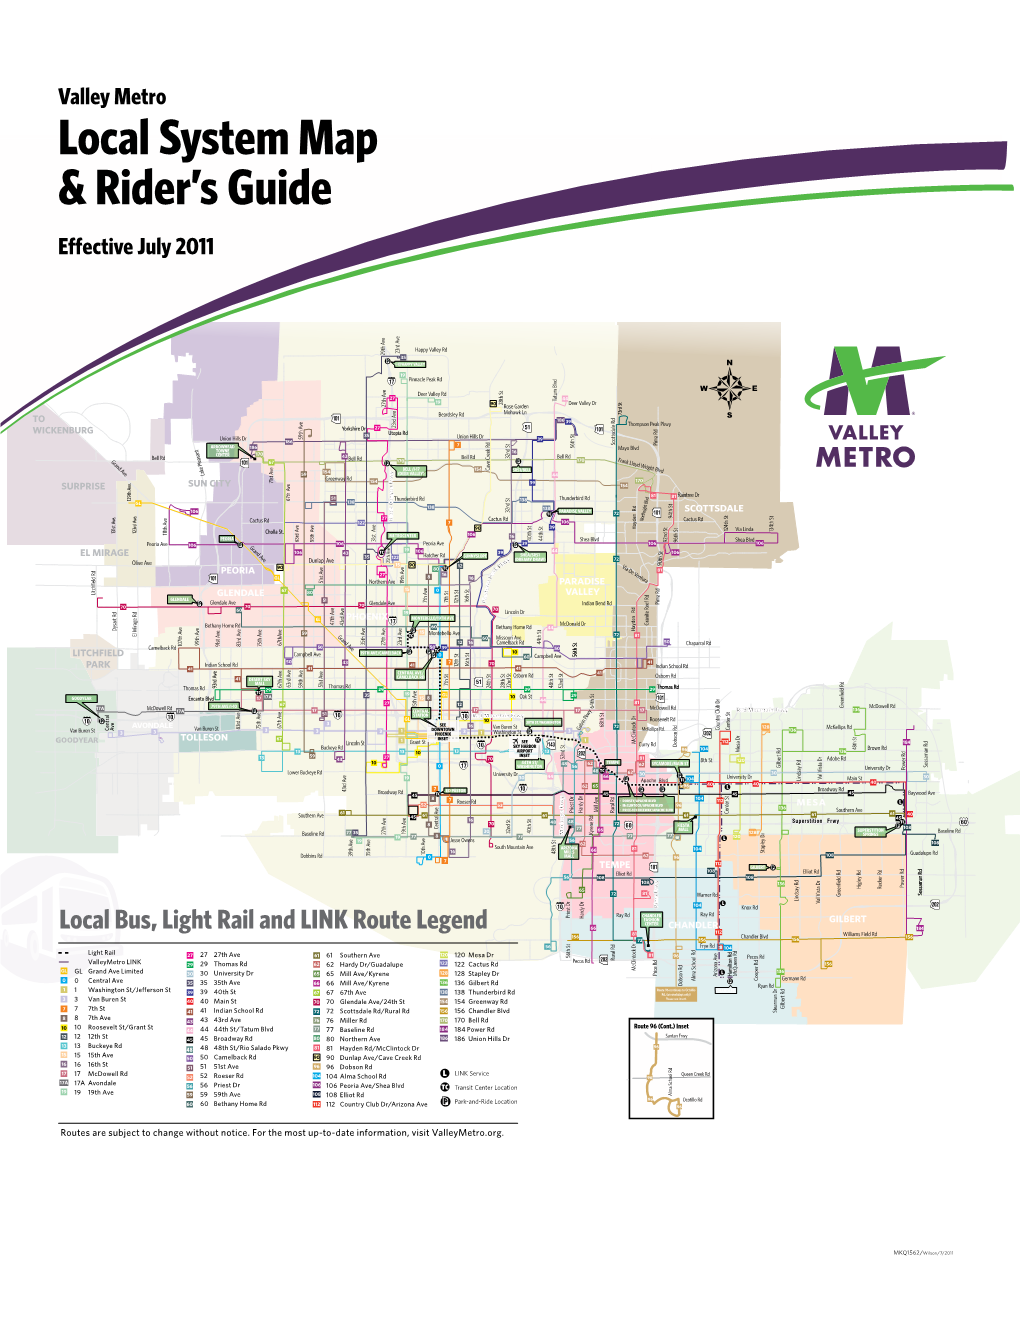 Local System Map & Rider's Guide